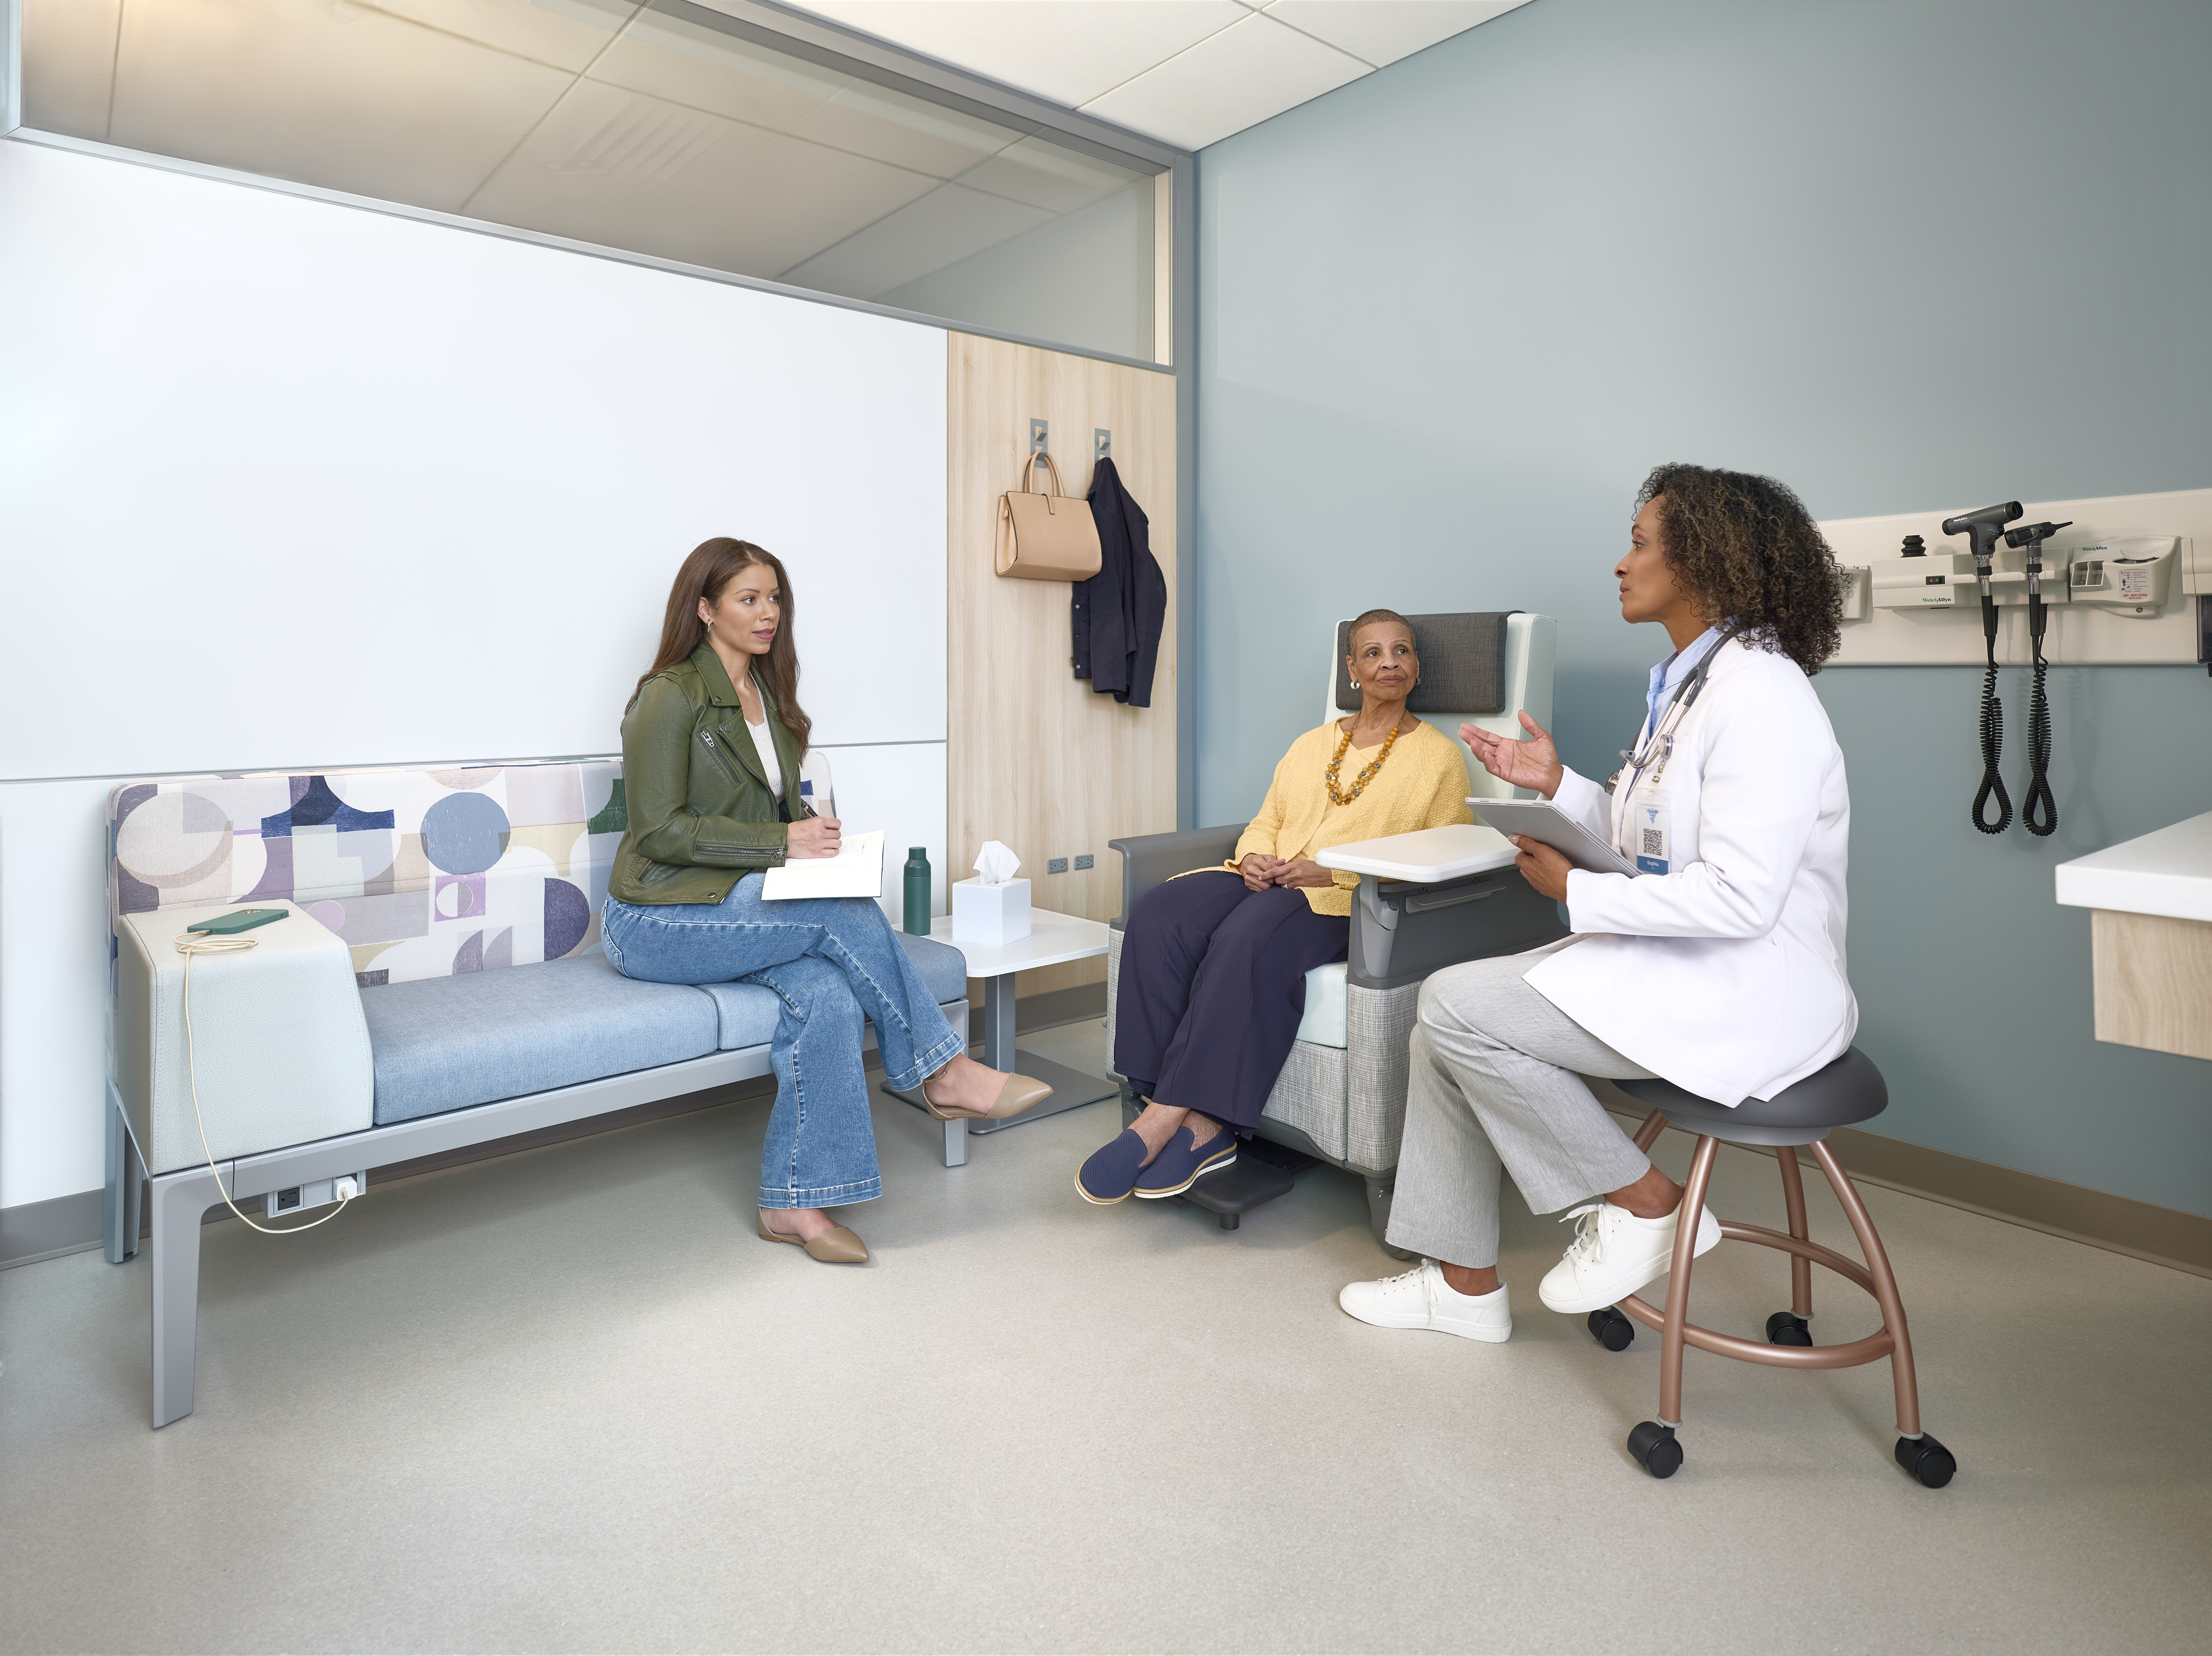 A medical patient room with a doctor speaking to two women.